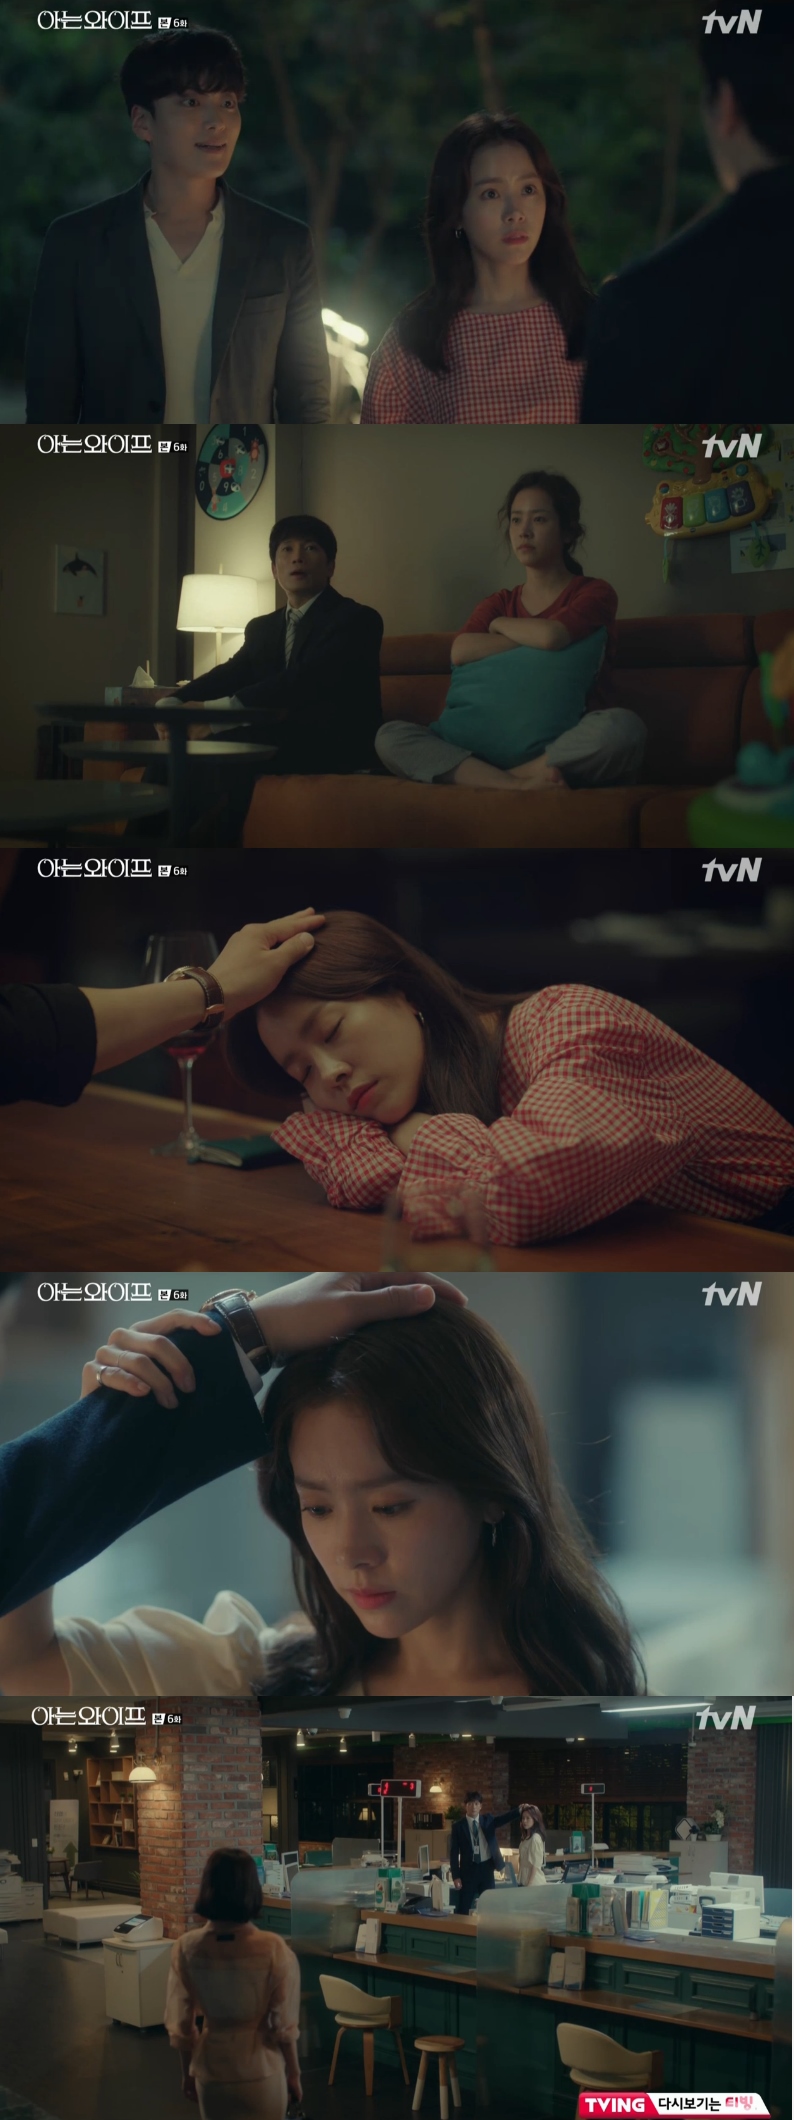 In the TVN drama Knowing Wife, which was broadcast on the 16th, Kang Han-Na (Lee Hye-won) caught the scene where Ji Sung (Cha Joo-hyuk) and Han Ji-min (Seo Woo-jin) were alone.Ji Sung was interrupted by Han Ji-min and Jang Seung-jo (Yoon Jong-hu) to eat; Jang Seung-jo asked Ji Sung not to disturb him.Han Ji-min was sent to the province for training; Son Jong-hak (Cha Bong-hee) told Ji Sung to go, but Jang Seung-jo asked him to give up.Jang Seung-jo rode his bike to get off work with Han Ji-min.Han Ji-min and Jang Seung-jo, who happened to meet Oh Ui-sik at a convenience store, even met Ji Sung and Park Hee-bon (Cha Ju-eun).Jang Seung-jo angered Ji Sung by telling him he would take out Han Ji-min and Jindo, asking Ji Sung to borrow a car.Ji Sung was worried about Han Ji-min and Jang Seung-jo even when he went to golf with his wife and family members. Ji Sung was unable to concentrate on family meetings and was confused.Looking at the kissing couple, I thought of Han Ji-min and Jang Seung-jo.Ji Sung, who ate at the Ouisik shop, eventually could not bear the anger and headed to Yangyang where the training center is located.Han Ji-min and Jang Seung-jo, who enjoyed dating while walking, were surprised by the appearance of Ji Sung; even Ji Sung asked him to put her to bed.Jang Seung-jo even kneeled and prayed, Please lets have a love affair.Ji Sung thought Han Ji-min liked melodrama, but Han Ji-min replied that he liked comedy.It turned out that when she was Ji Sungs wife, she had a lot of things to cry about, but she did not want to see her weak heart.Ji Sung, who realized this late, regretted the past.Ji Sung stroked Han Ji-mins head, thinking, You didnt become Monster, I made you Monster; Im sorry Woo Jin-ah.Then, Han Ji-min, who was sleeping, opened his eyes and the atmosphere became strange. Ji Sung blamed himself for interfering with Han Ji-min and Jang Seung-jo as he climbed to Seoul.Then the questionable The Man from Nowhere, who claimed to be able to turn back to the past through the wormhole in front of Ji Sung, passed again.Ji Sung chased the Man from Nowhere but missed; Han Ji-min munched on when Ji Sung stroked his head.When we met again at the company, Ji Sung and Han Ji-min became awkward; Han Ji-min avoided Ji Sung.Han Ji-min put Ji Sungs hand on his head, saying that he had to check with Ji Sung when he was alone with the bank.